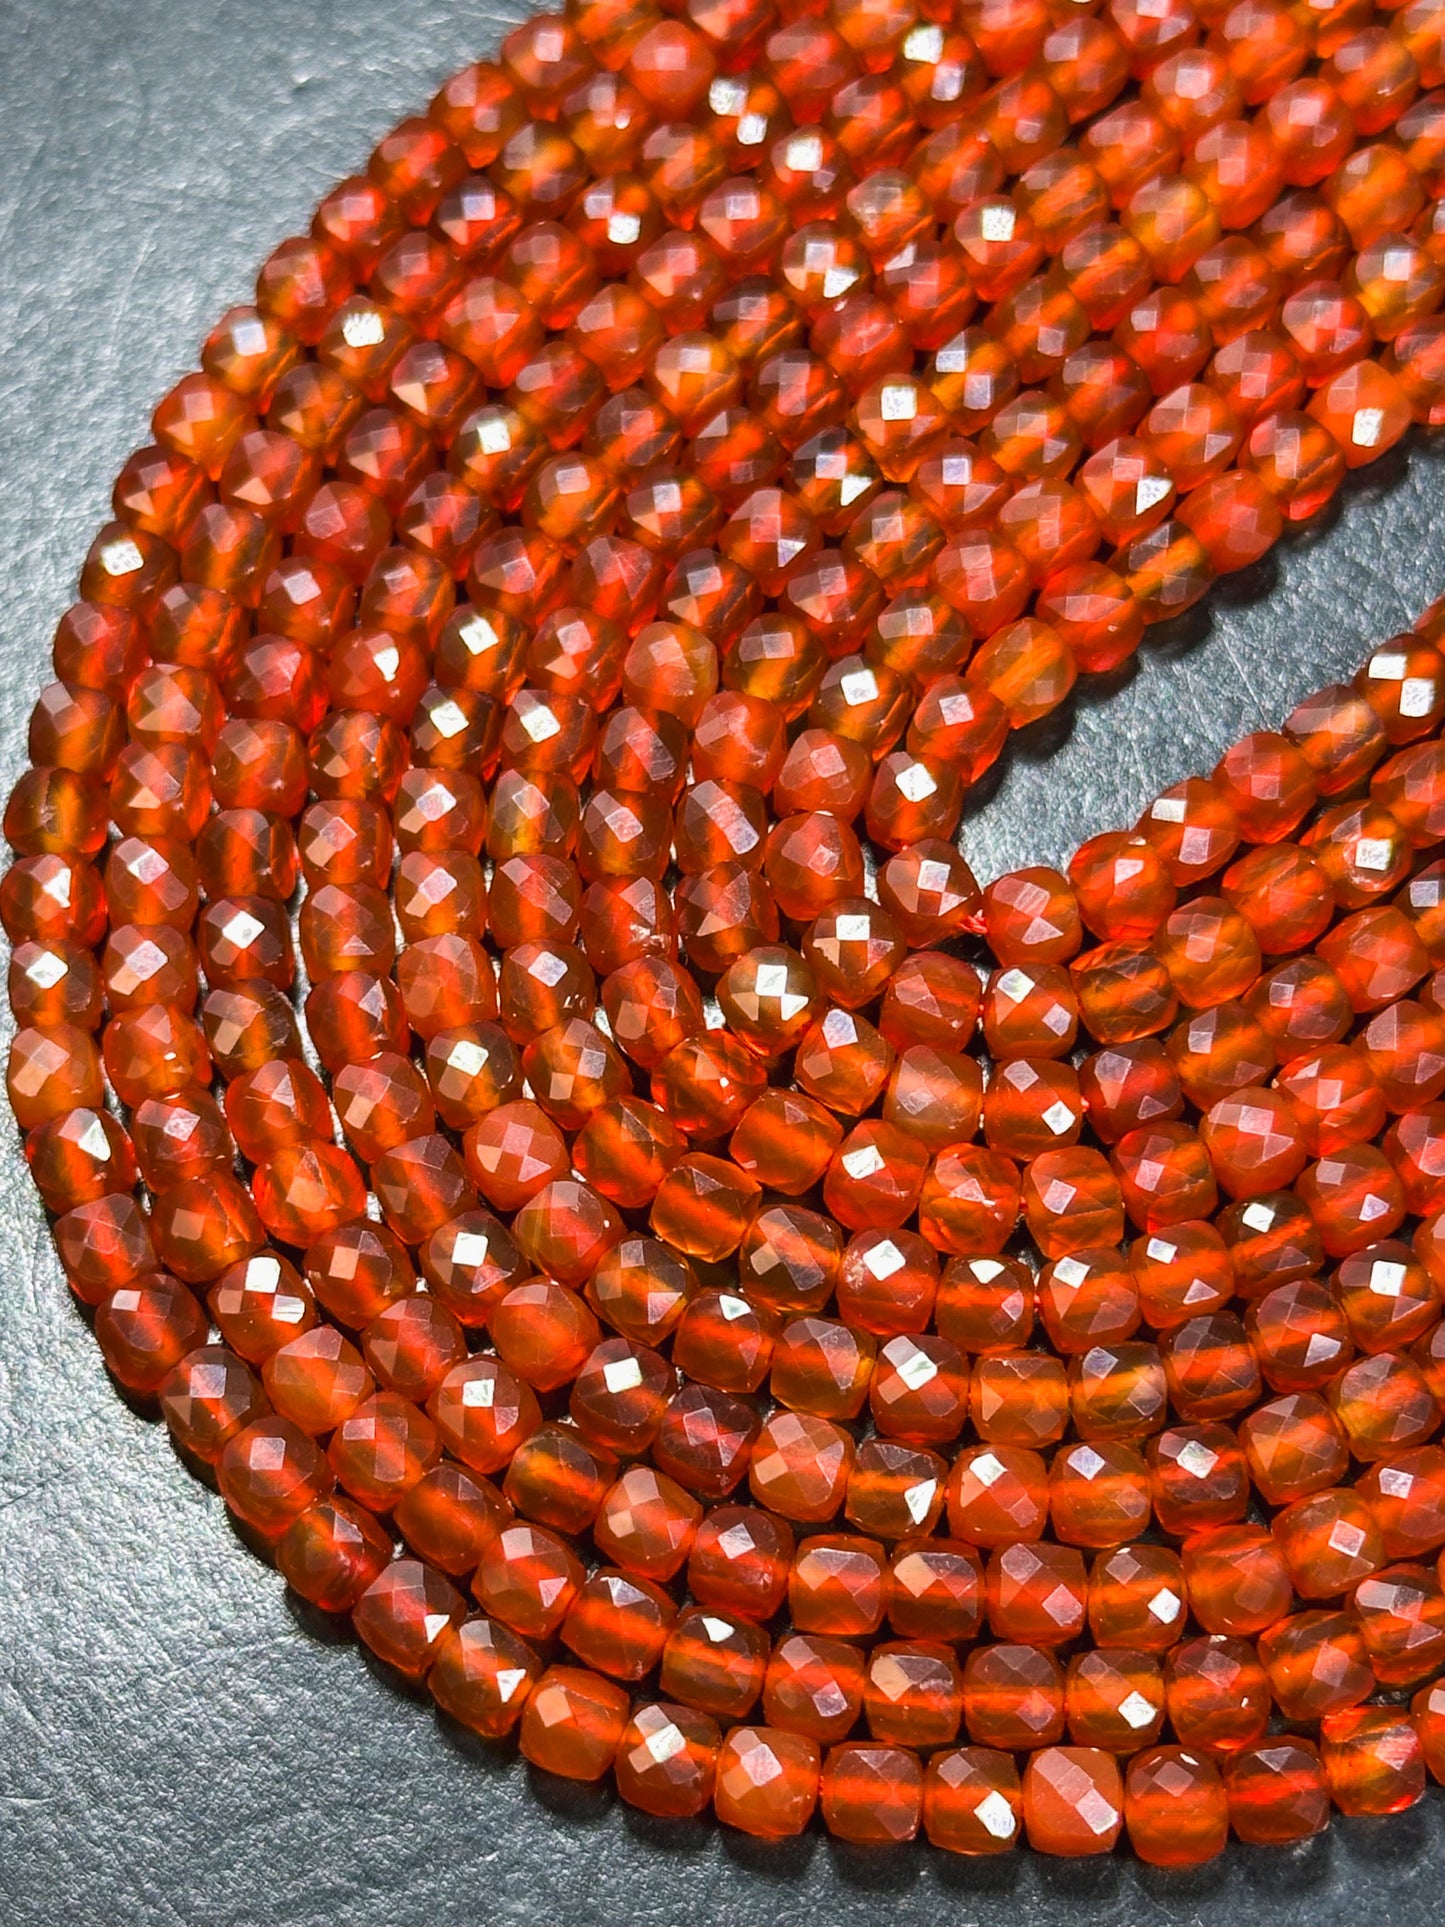 AAA Natural Carnelian Gemstone Bead Faceted 4mm Cube Shape Bead, Beautiful Natural Red Orange Color Carnelian Stone Beads Full Strand 15.5"